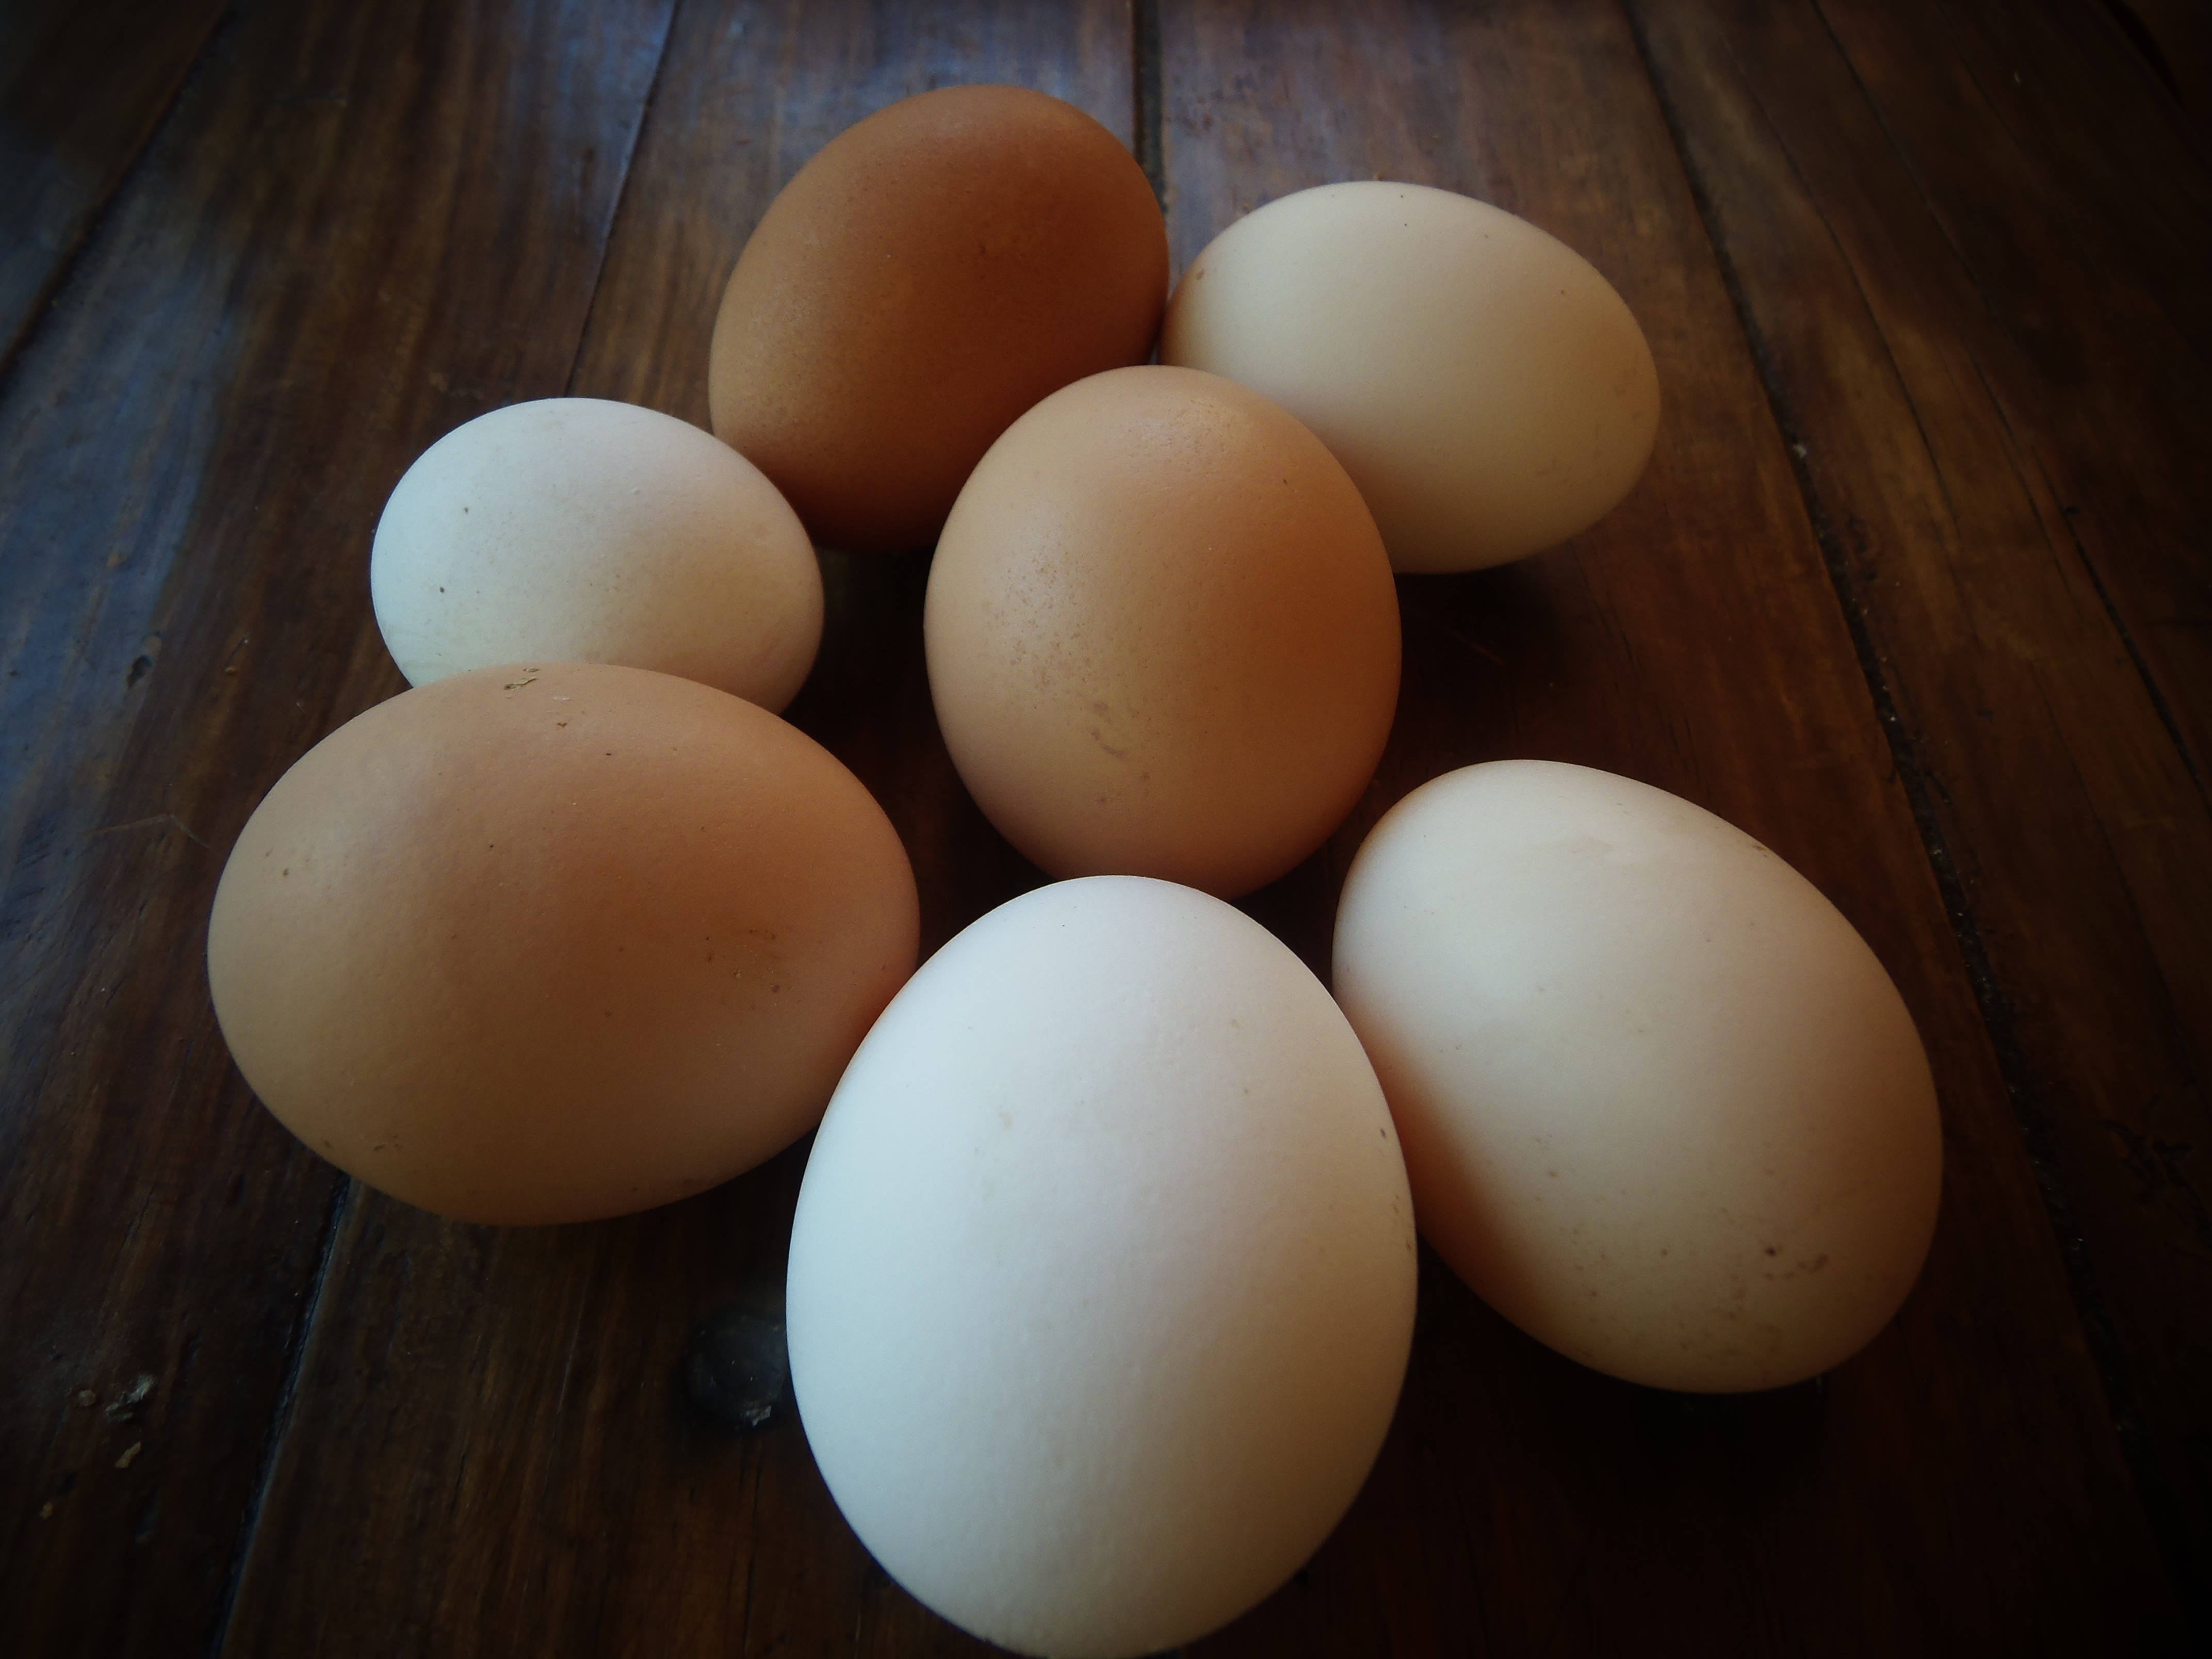 4 white and 3 brown eggs